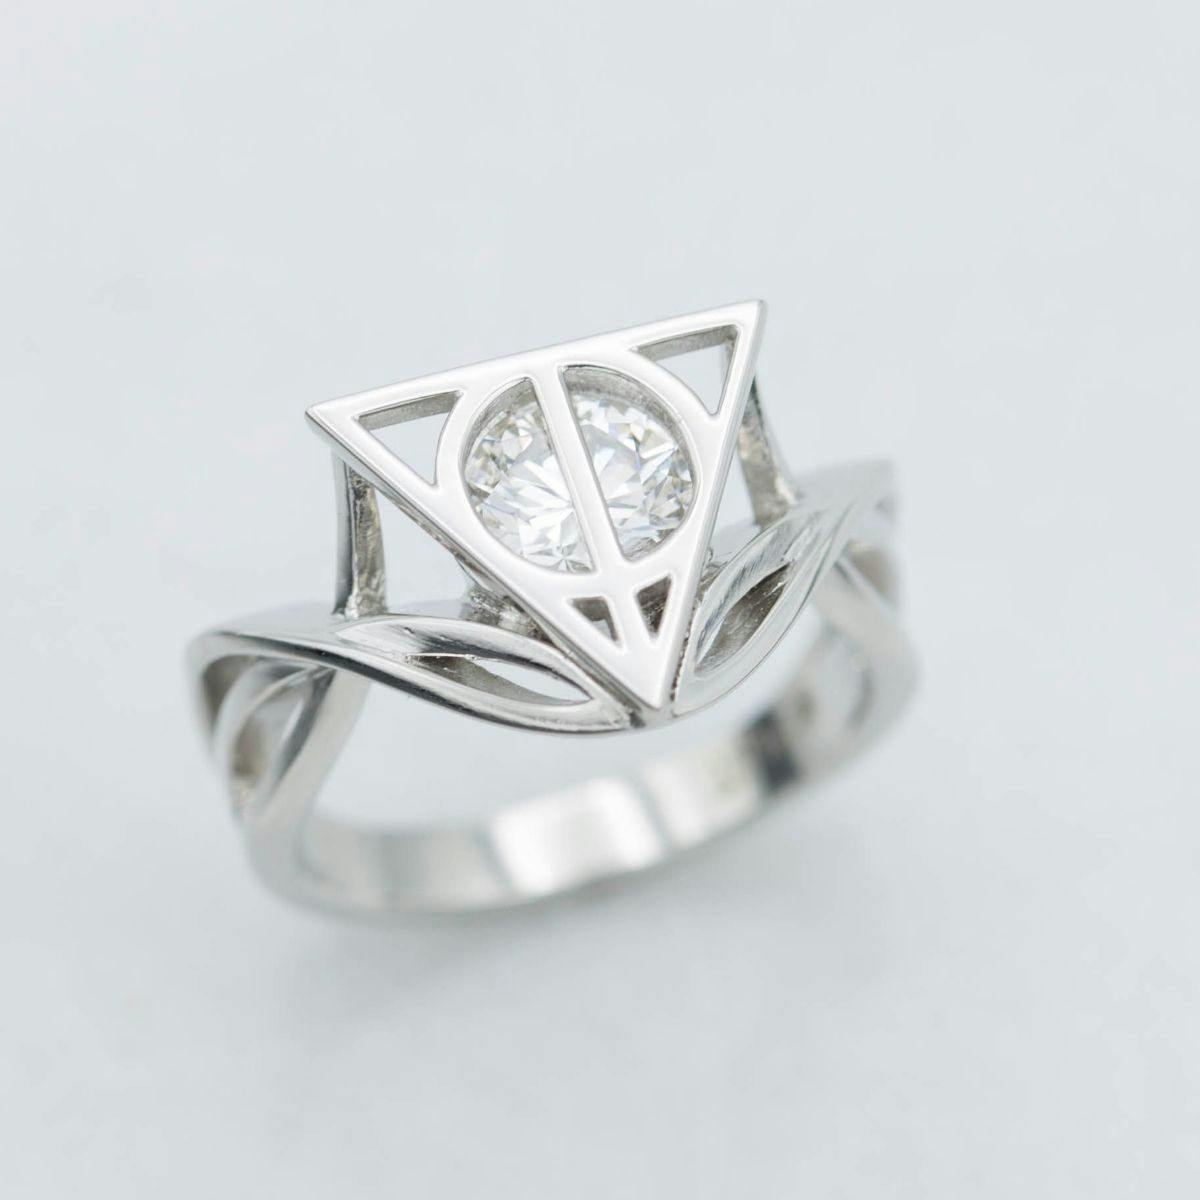 CustomMade Deathly Hallows Engagement Ring